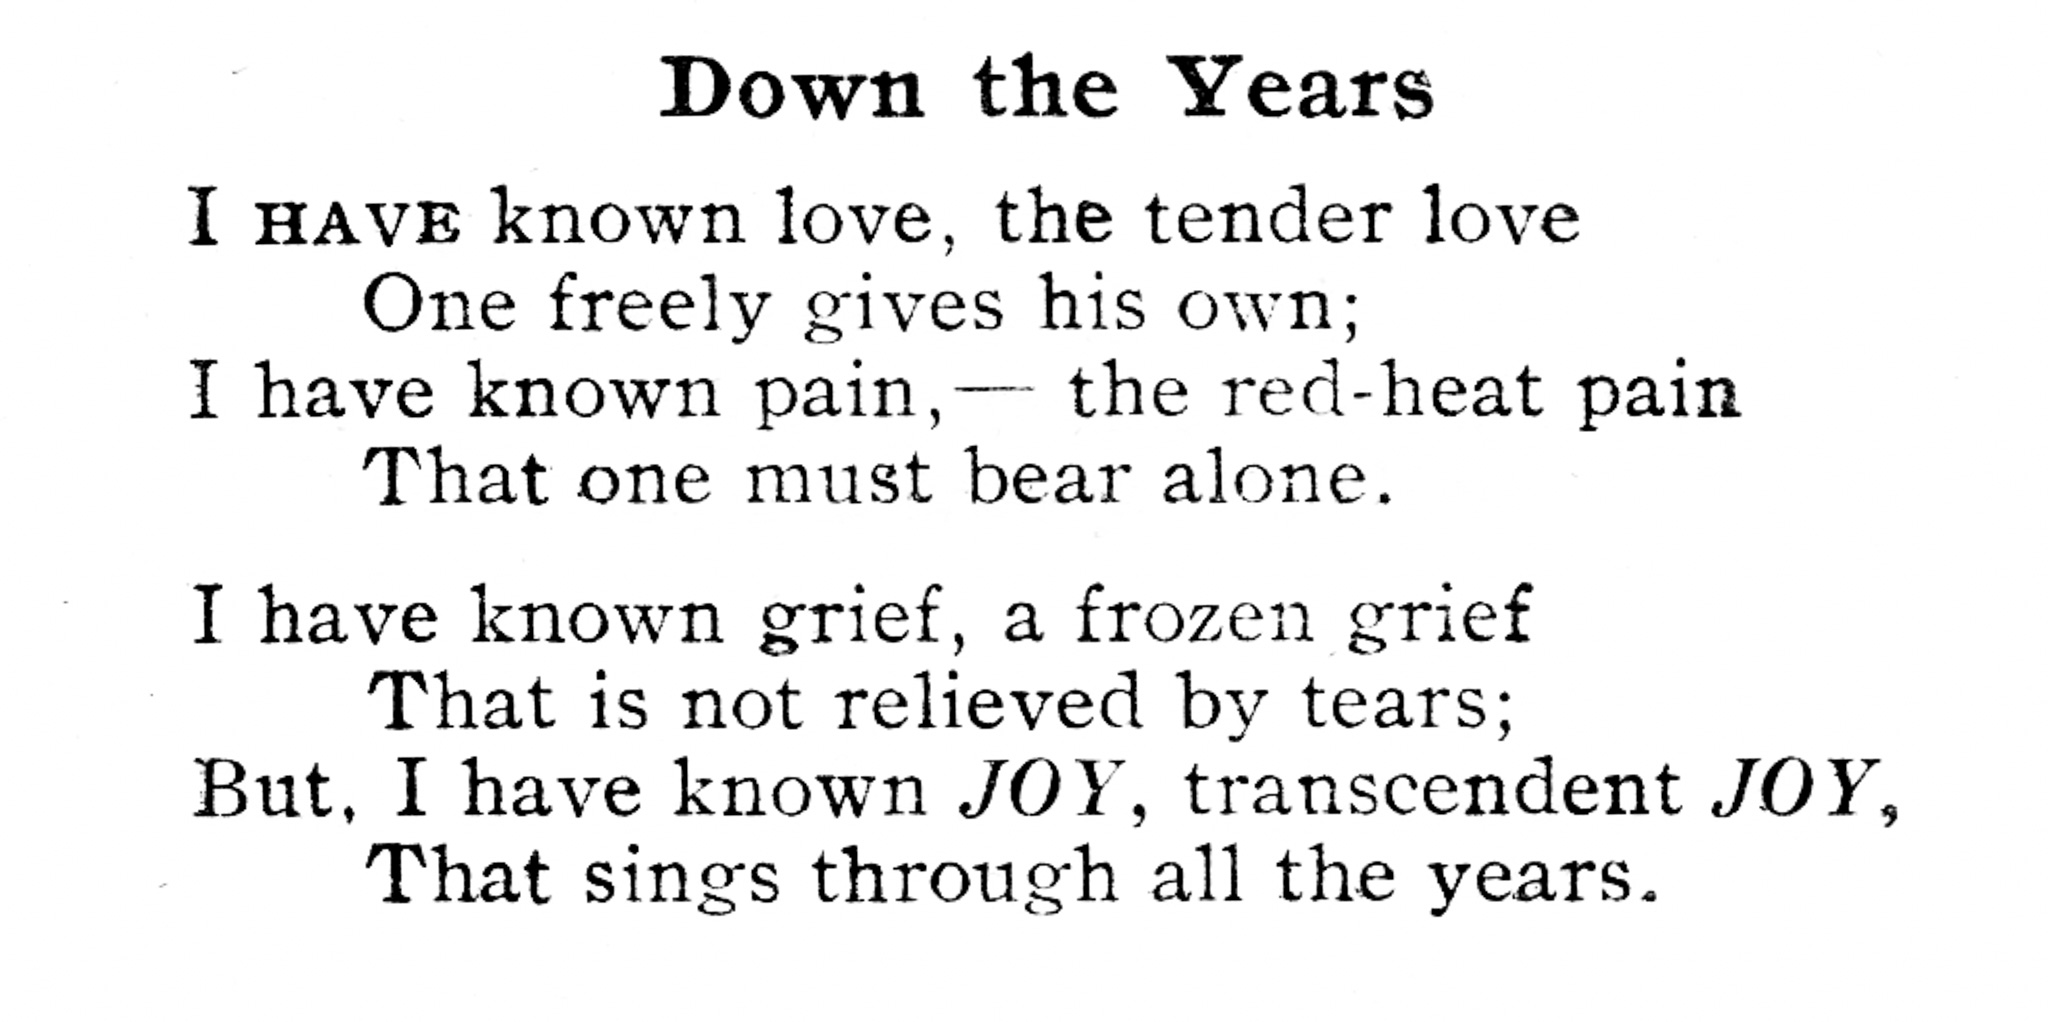 Black and white copy of Marcia's poem"Down the Years". It reads "I have known love, the tender love/ One freely gives his own;/ I have known pain,--the red-heat pain/ That one must bear alone./ I have known grief, a frozen grief/ That is not relieved by tears;/ But, I have know JOY, transcendent JOY,/ That sings through all the years. 